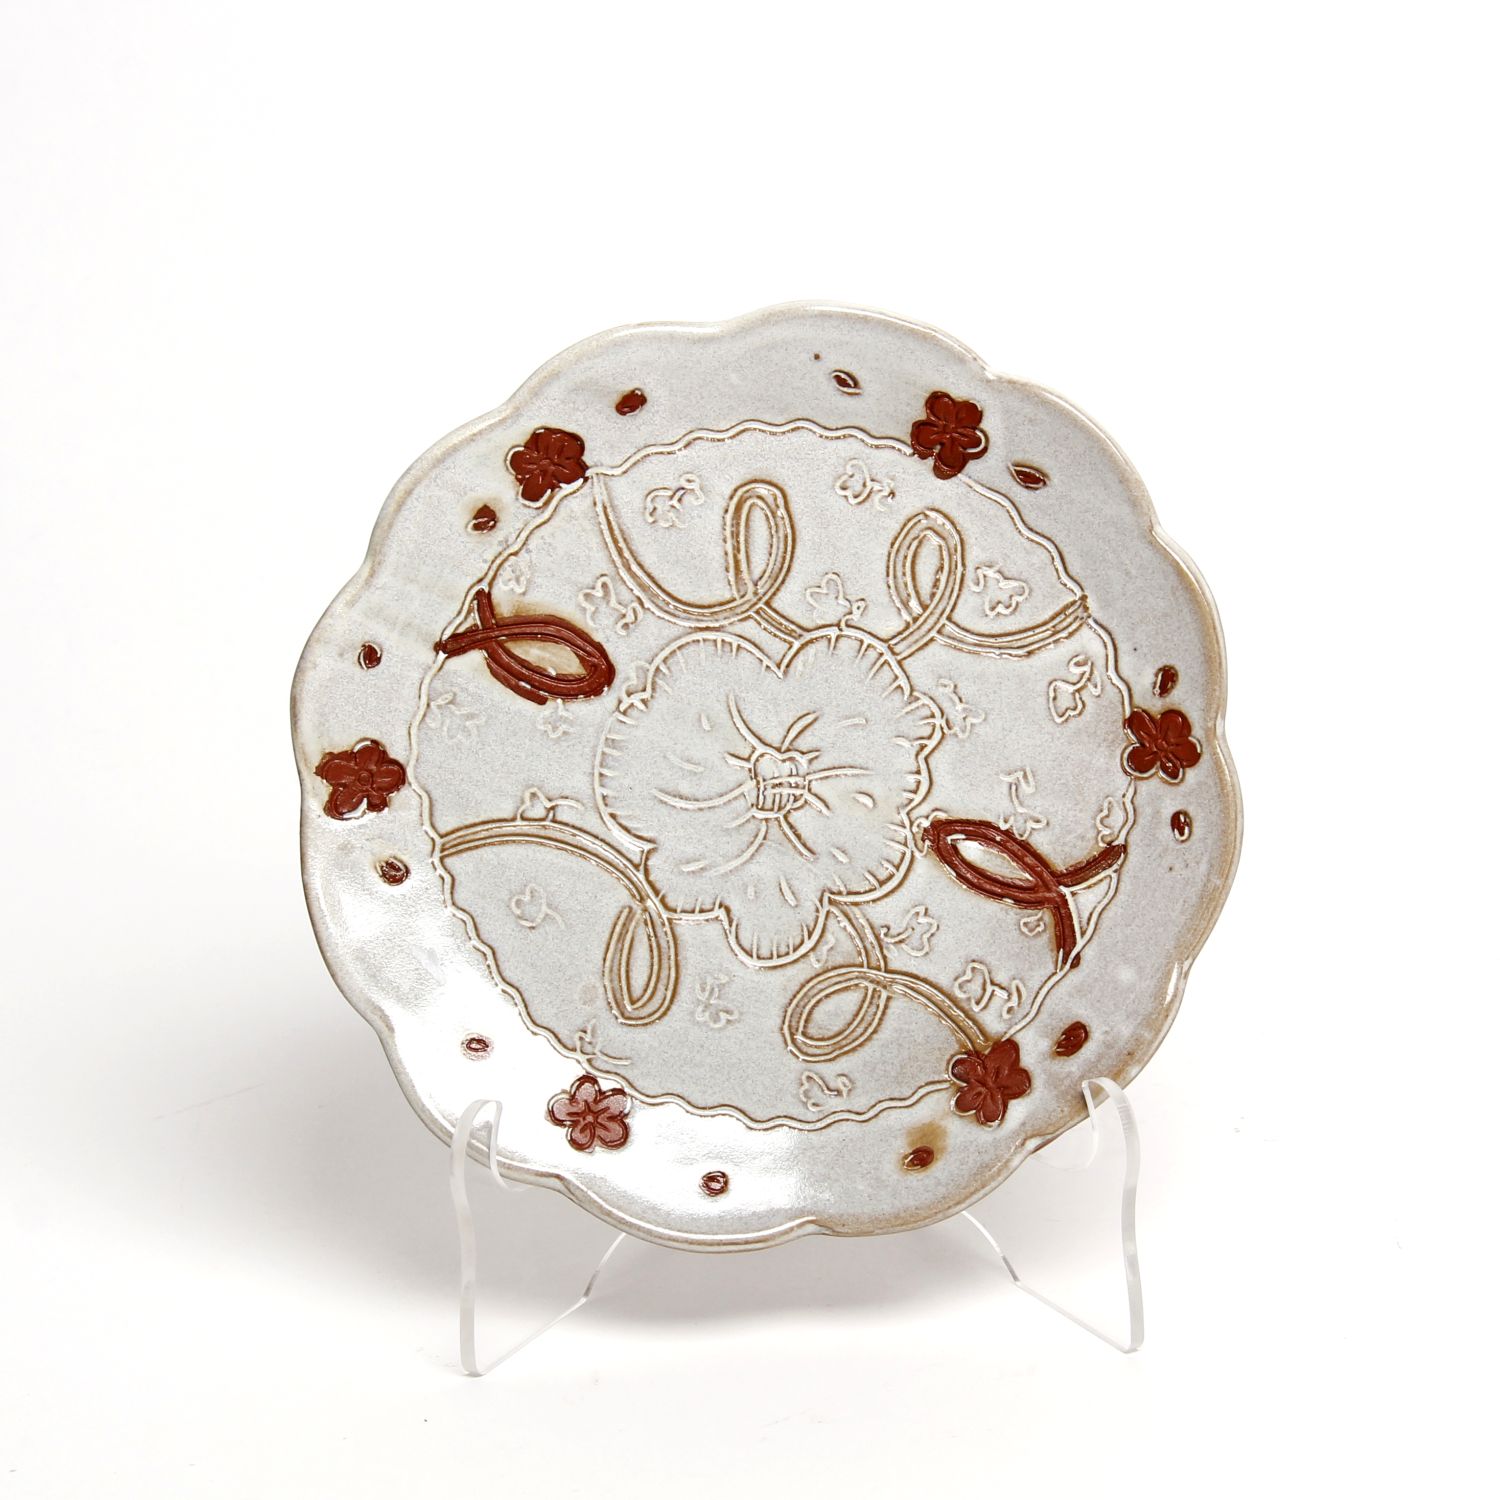 Zoe Pinnell: Small White Plate With Floral Centre Product Image 4 of 4